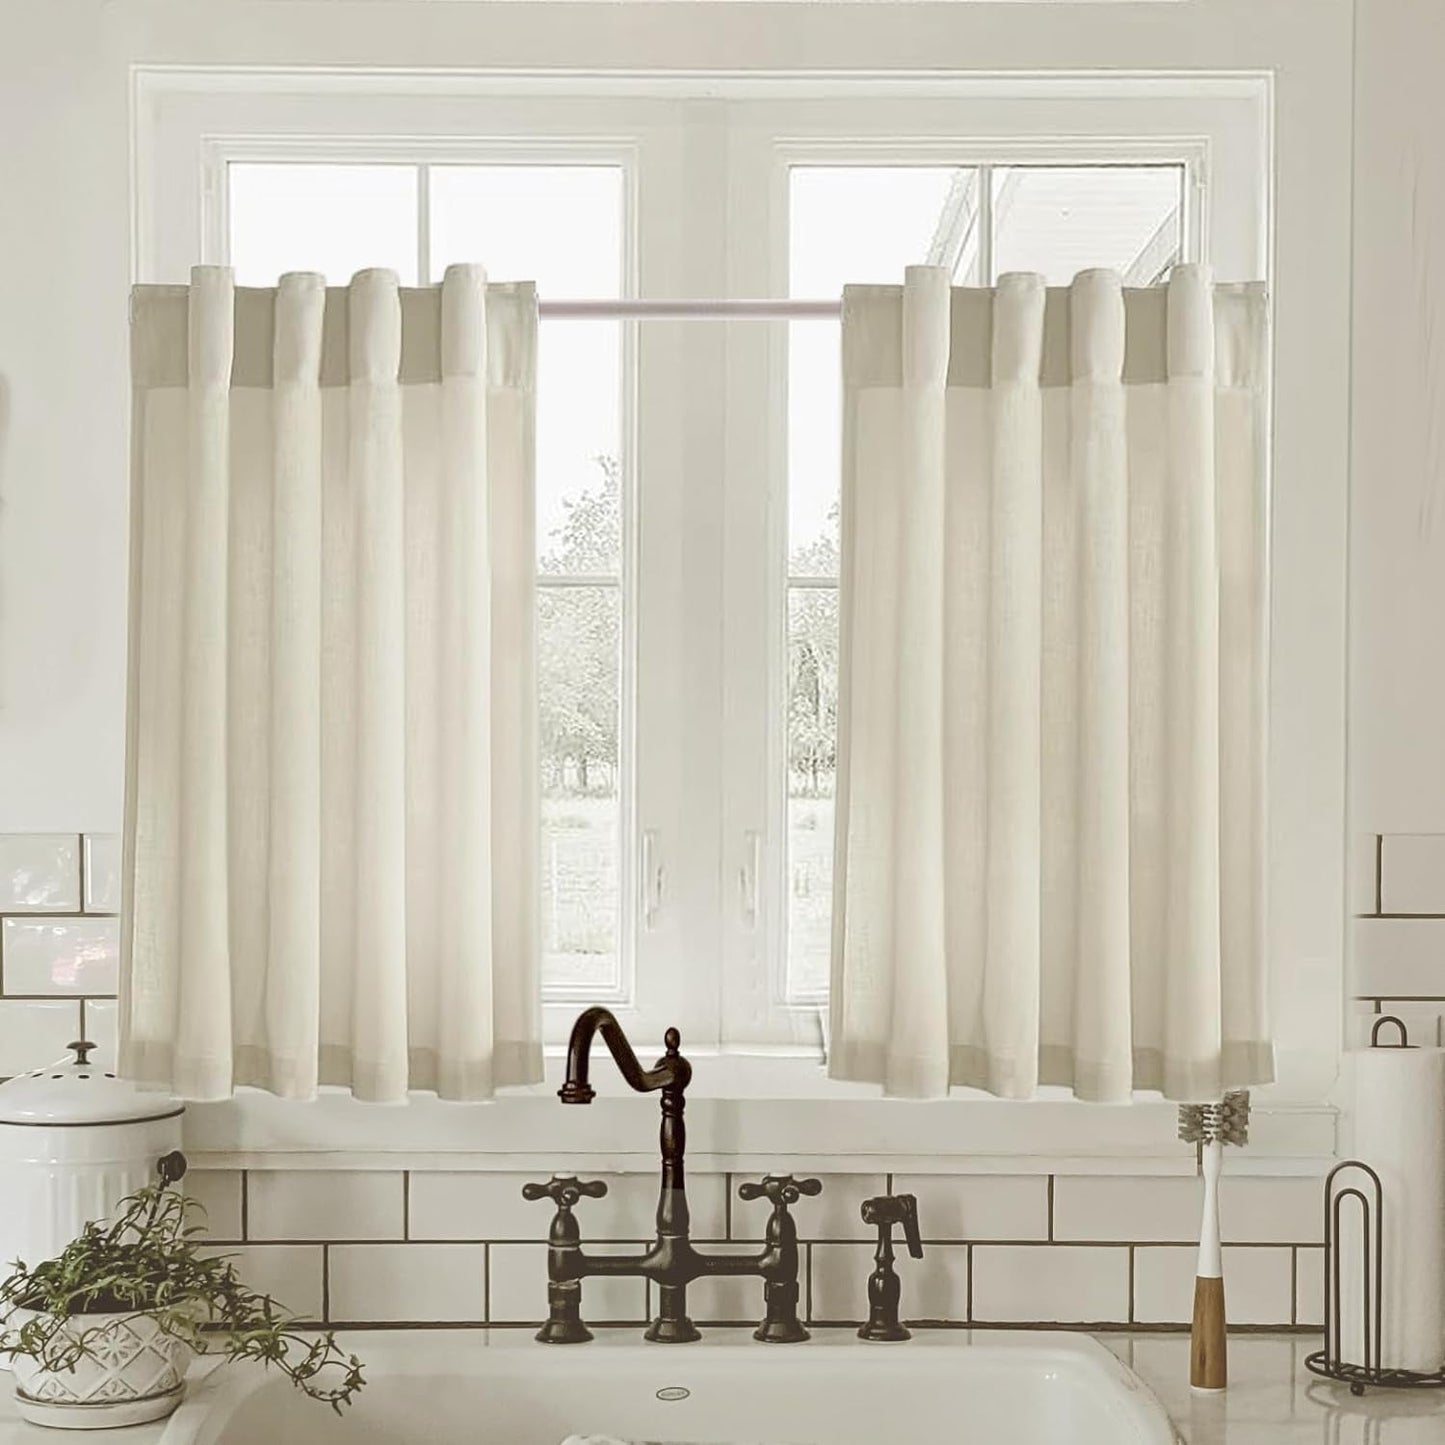 Farmhouse Kitchen Window Curtains over Sink 36 Inch Length Cafe Curtain 2 Panel Set Neutral Small Window Treatment Tiers Sheer Curtains for Basement Camper 26Wx36L Nature